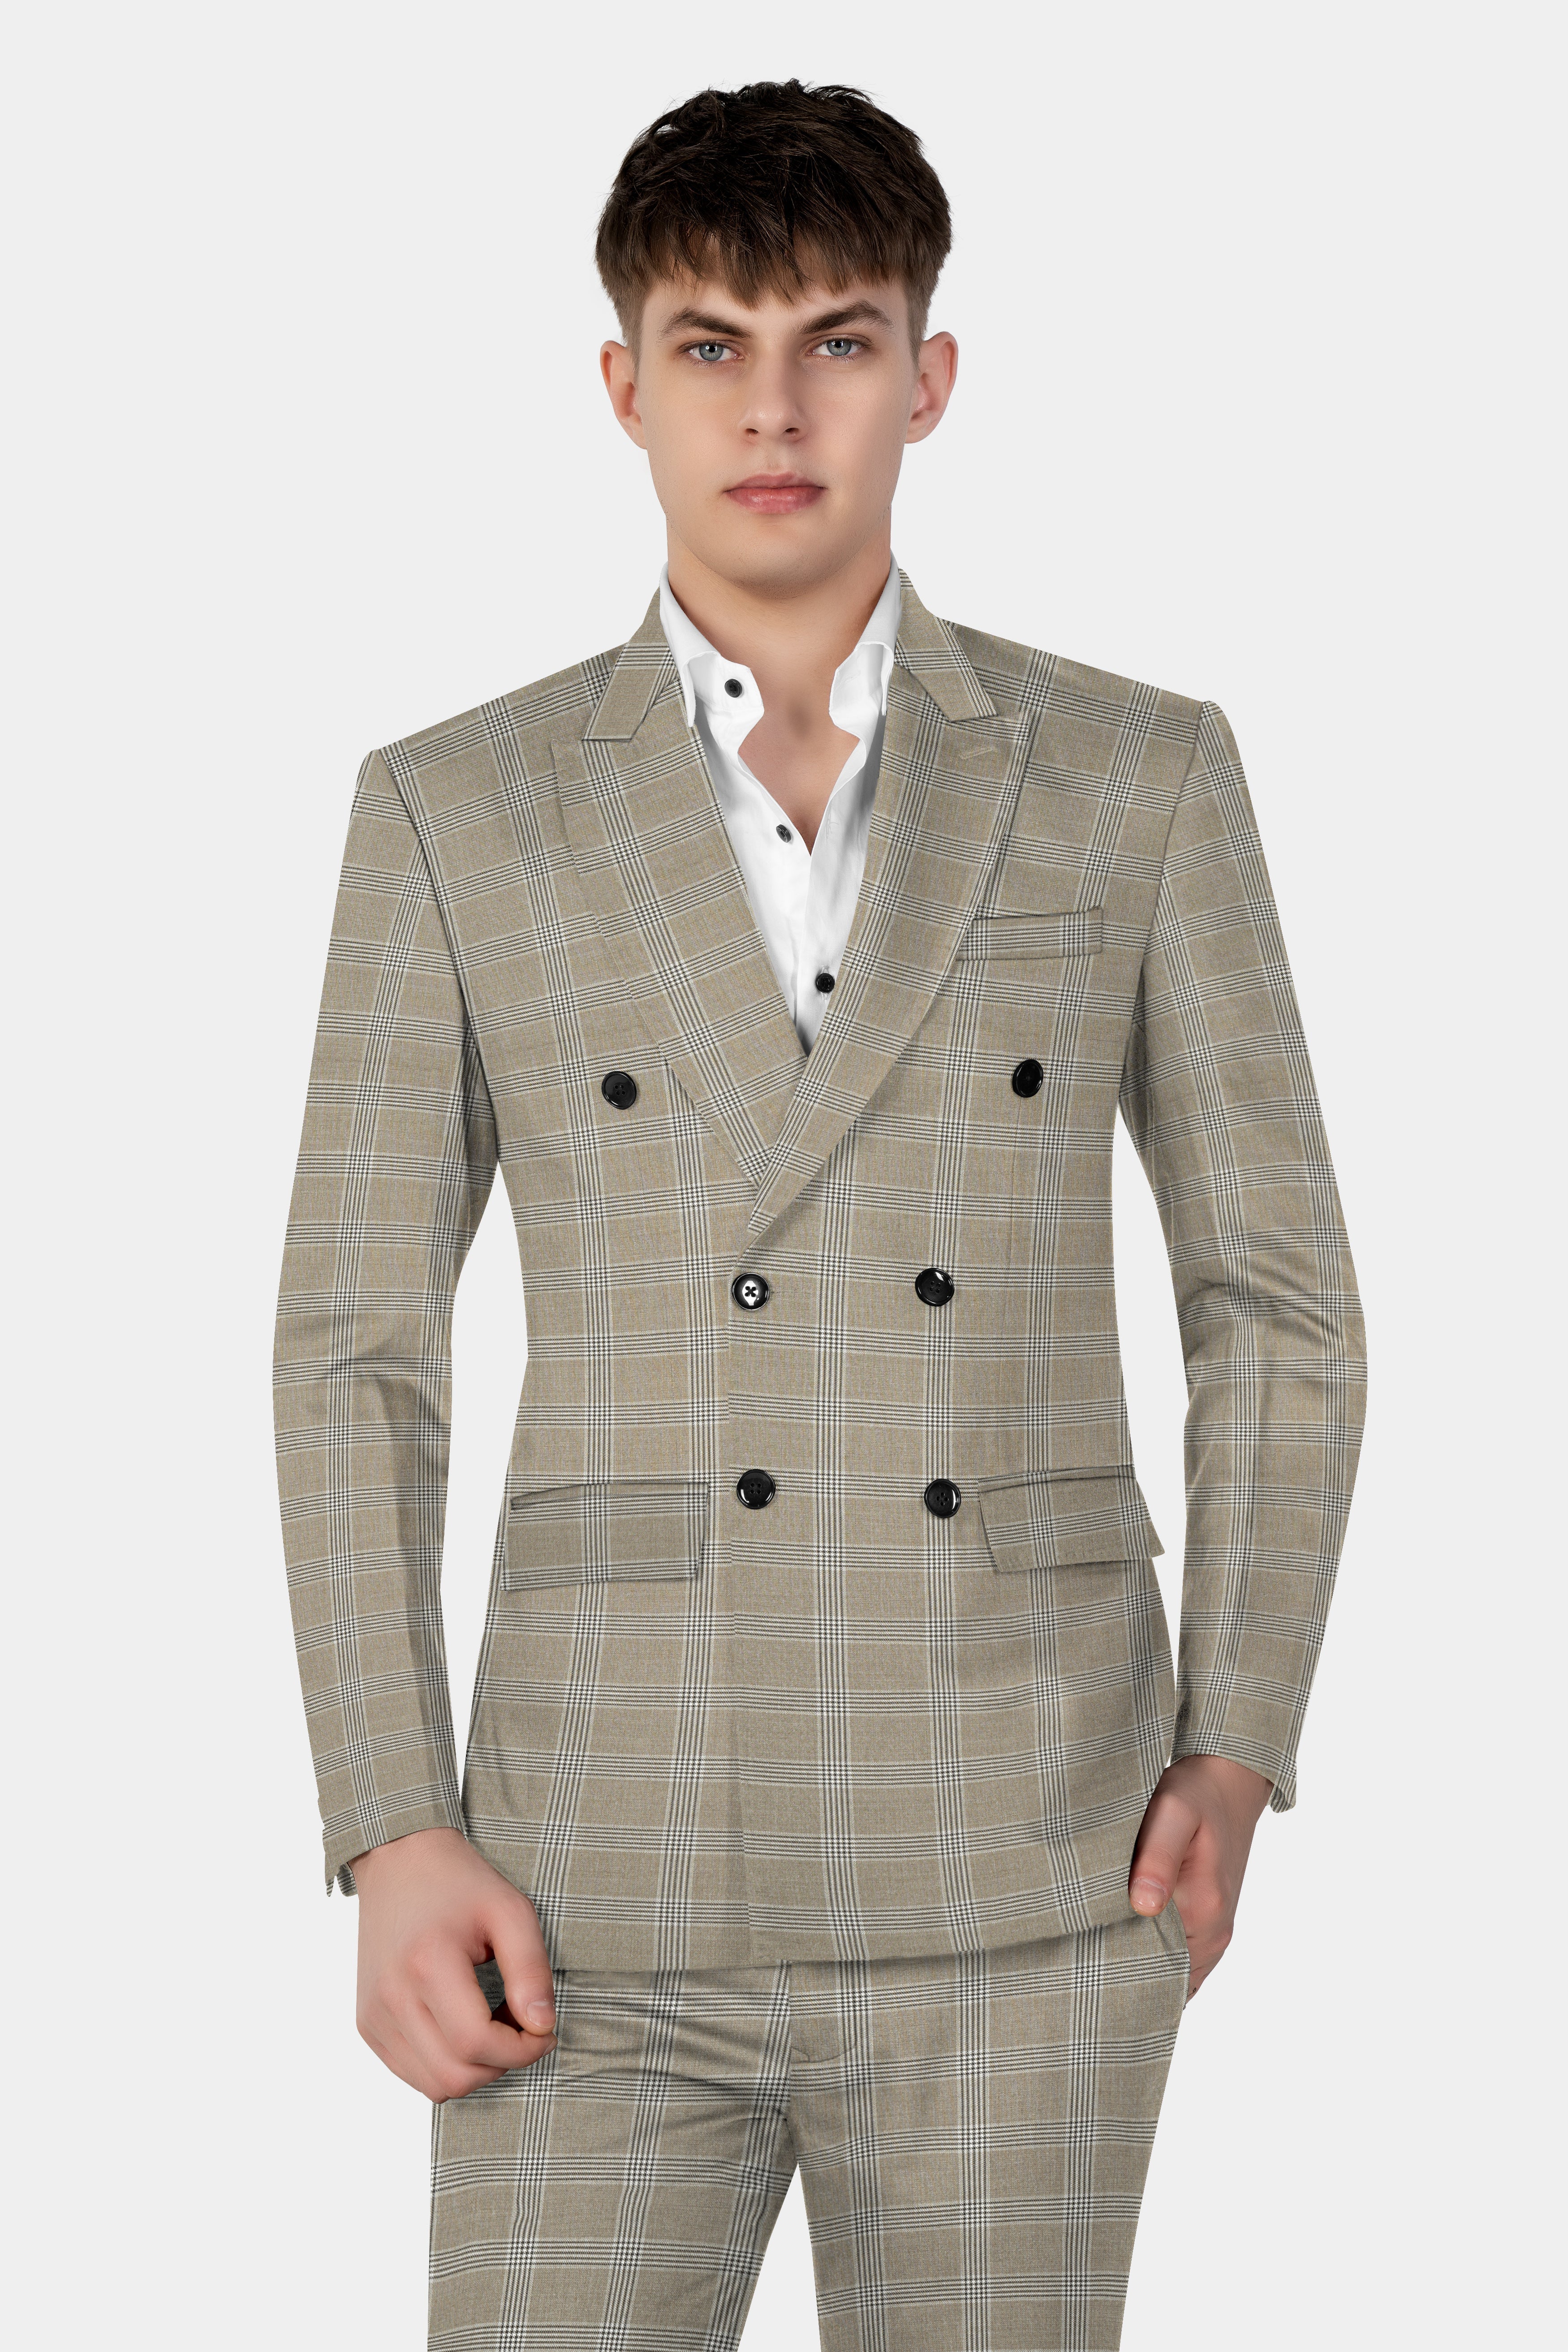 Sandrift Cream Plaid Wool Blend Double Breasted Suit